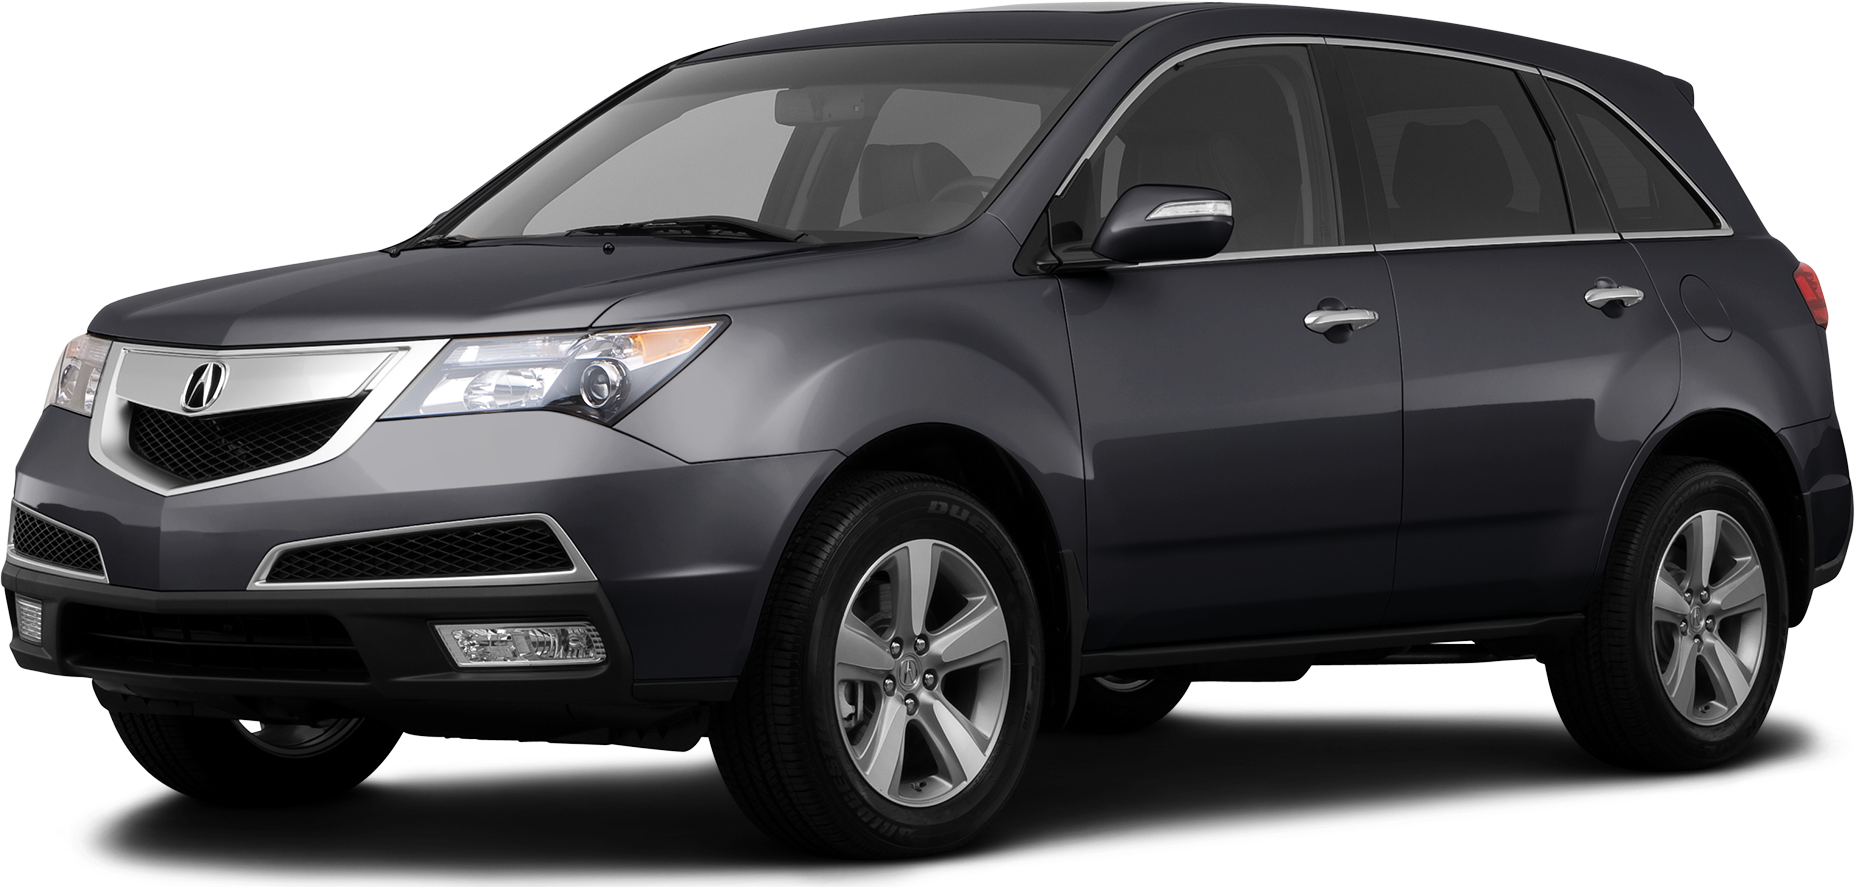 2013 Acura Mdx Price Value Ratings And Reviews Kelley Blue Book